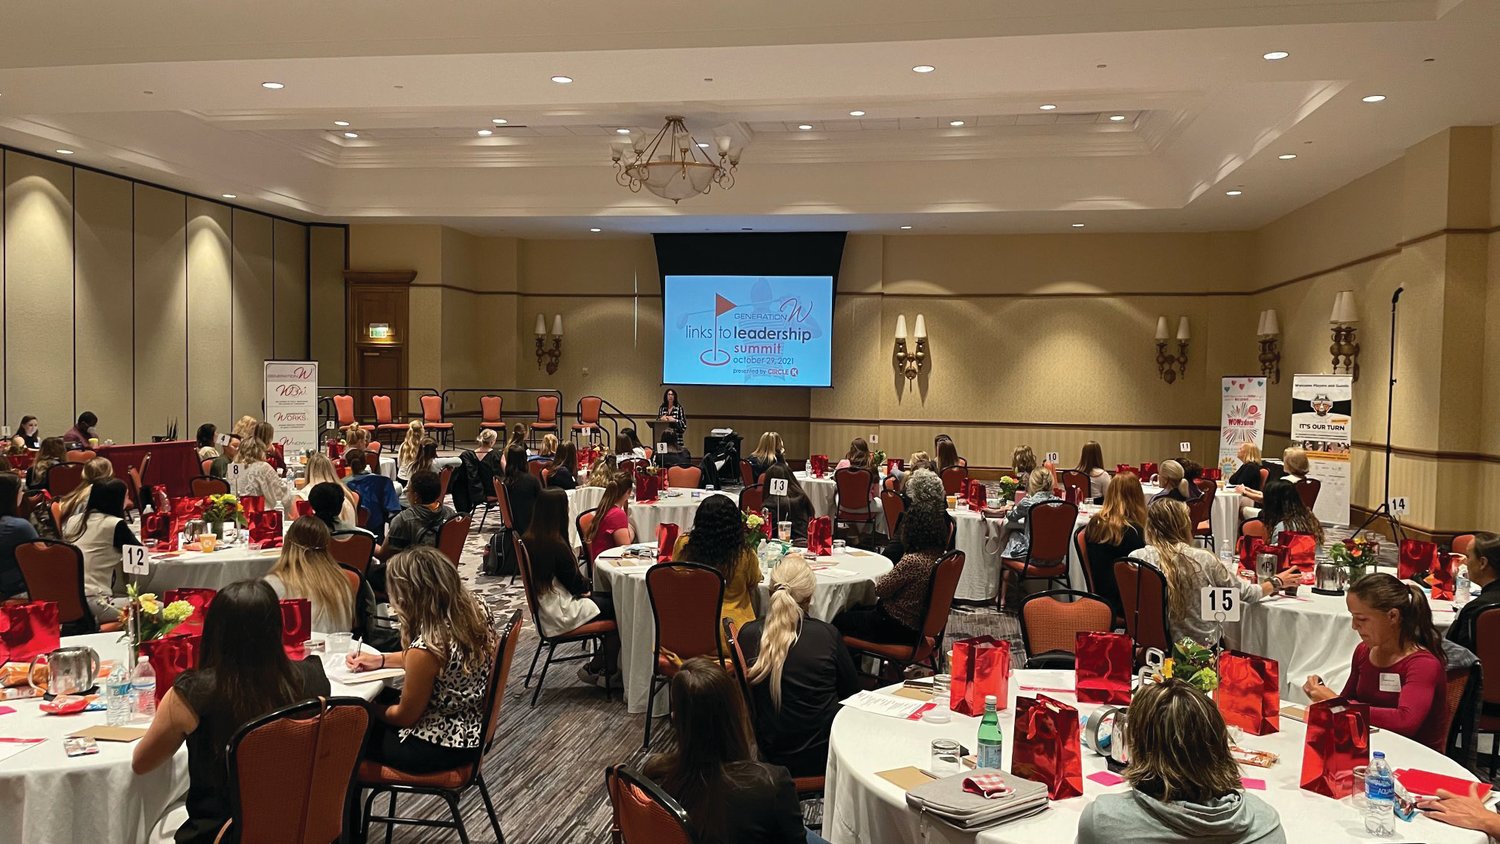 The Generation W’s Links to Leadership Summit presented by Circle K was held at the World Golf Village Renaissance Resort Hotel Oct. 29.